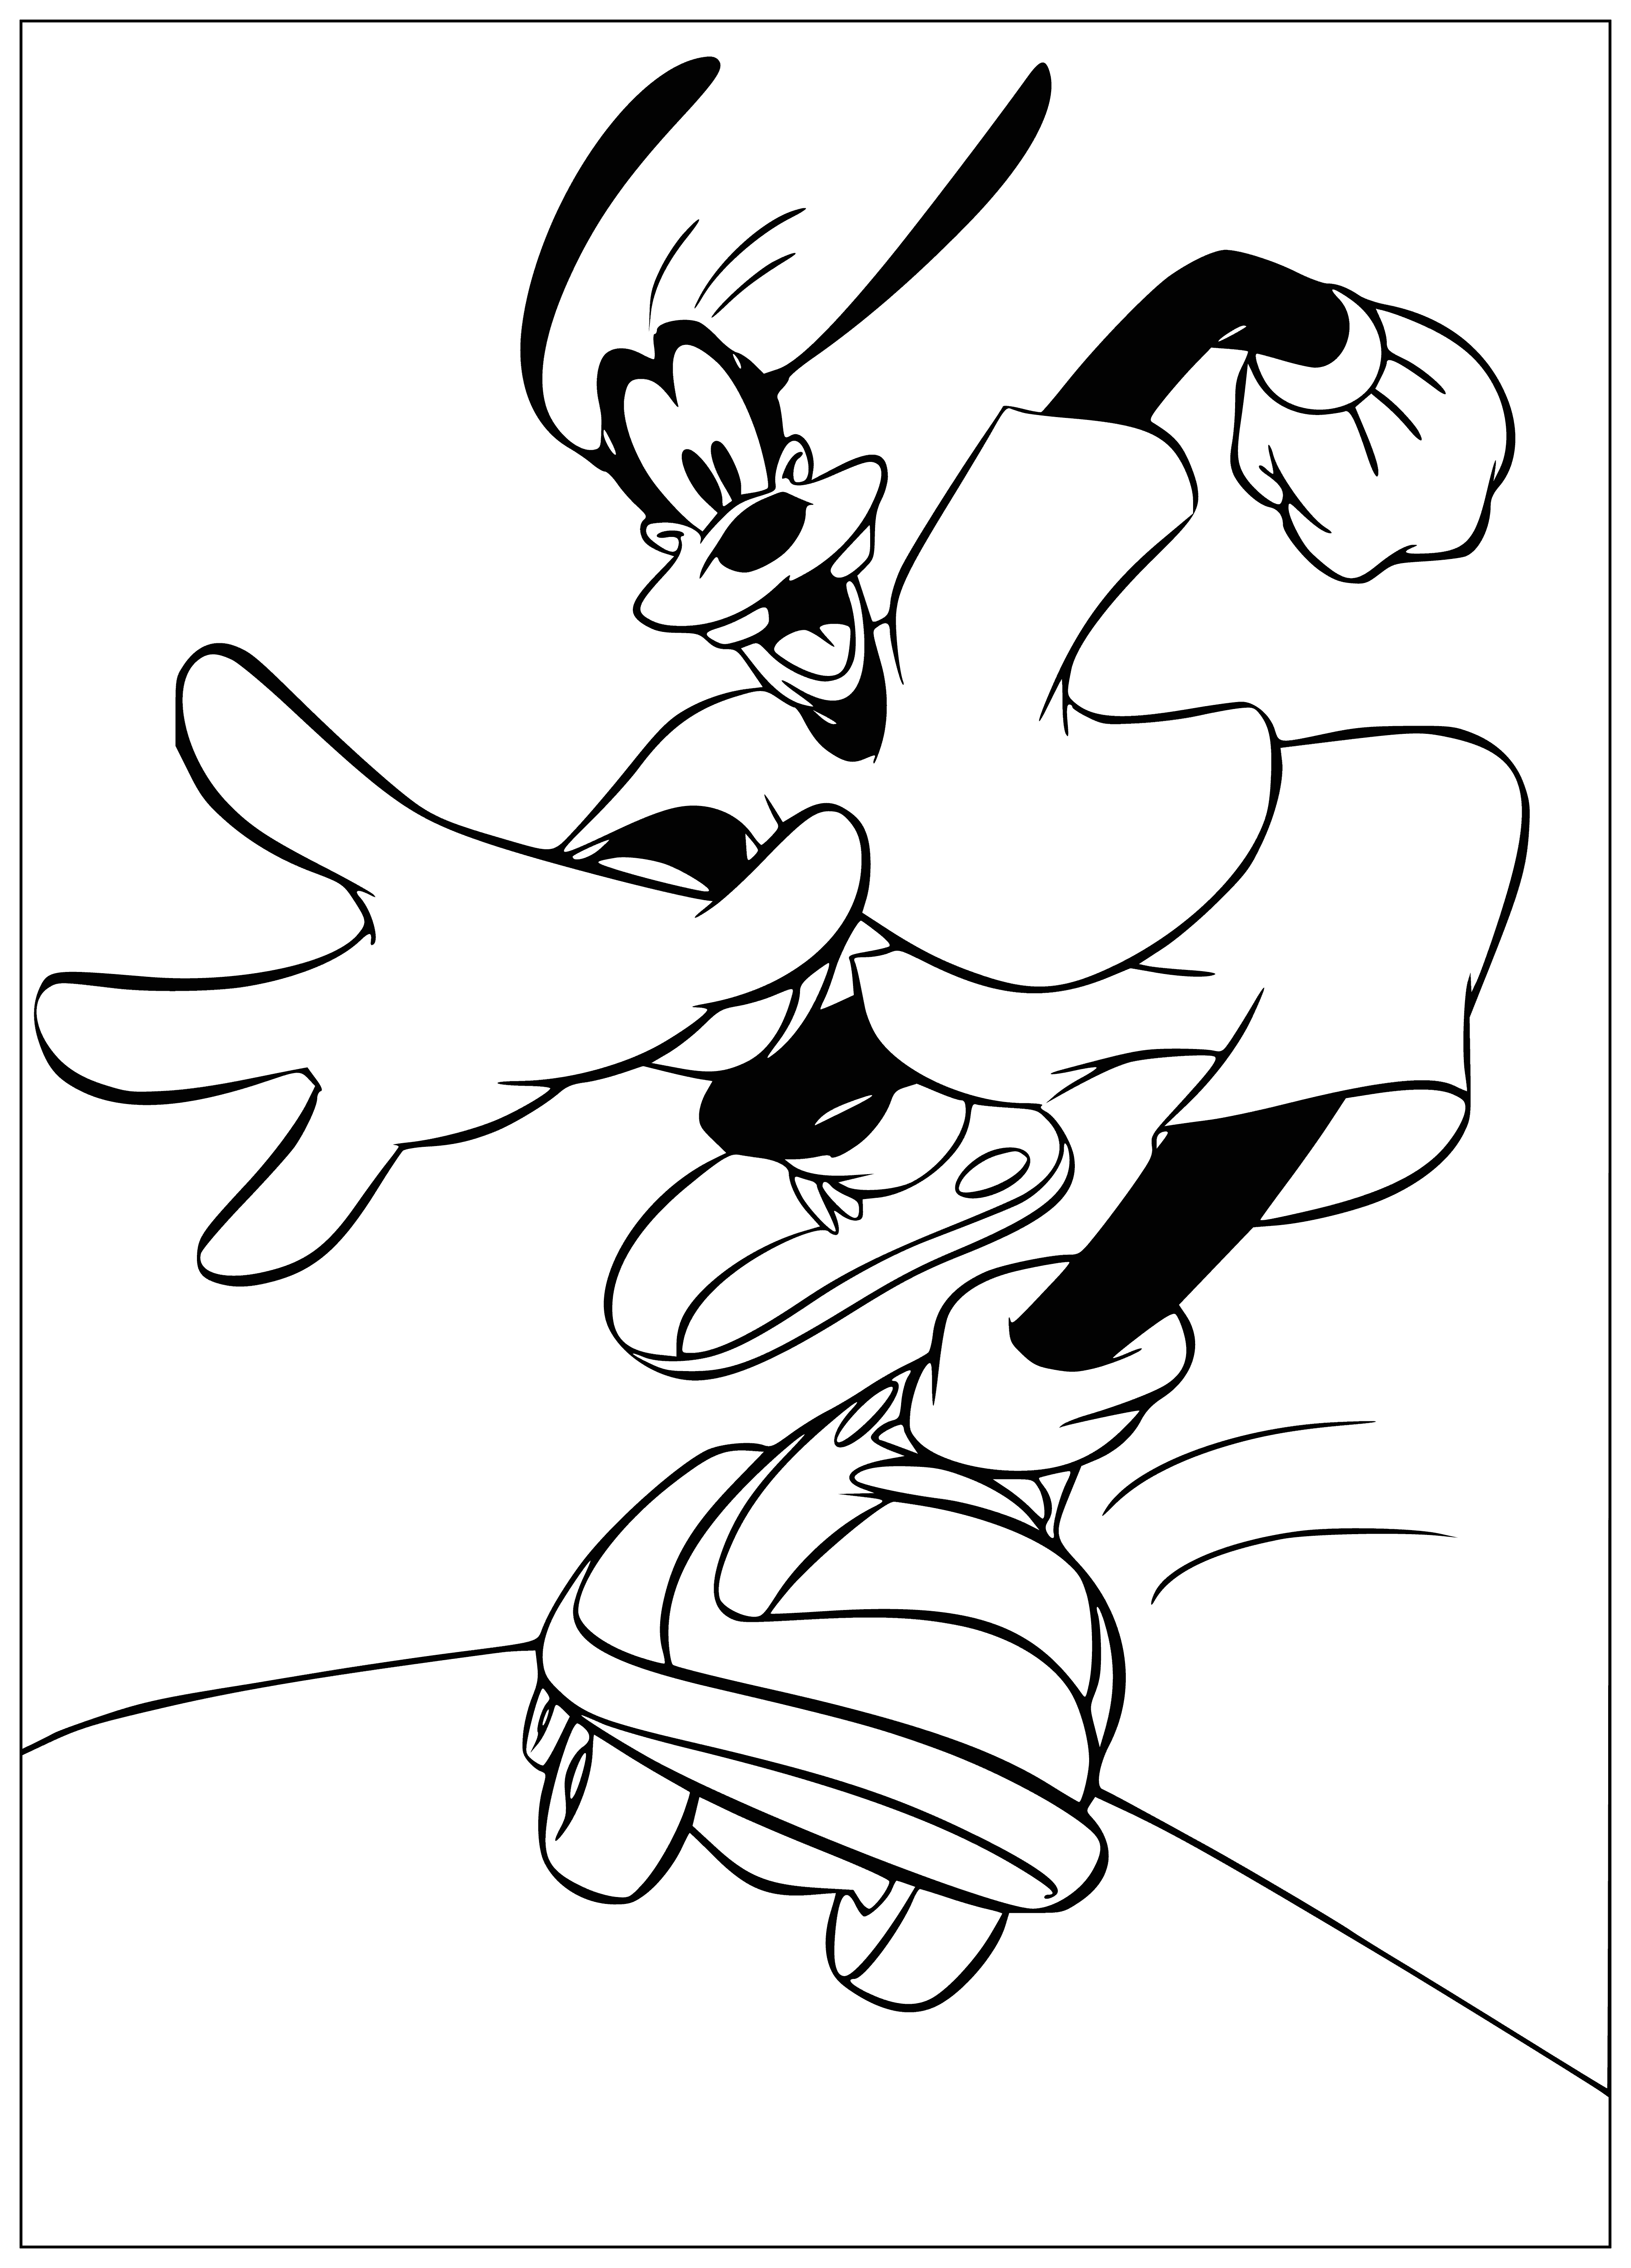 Goofy on the skate coloring page